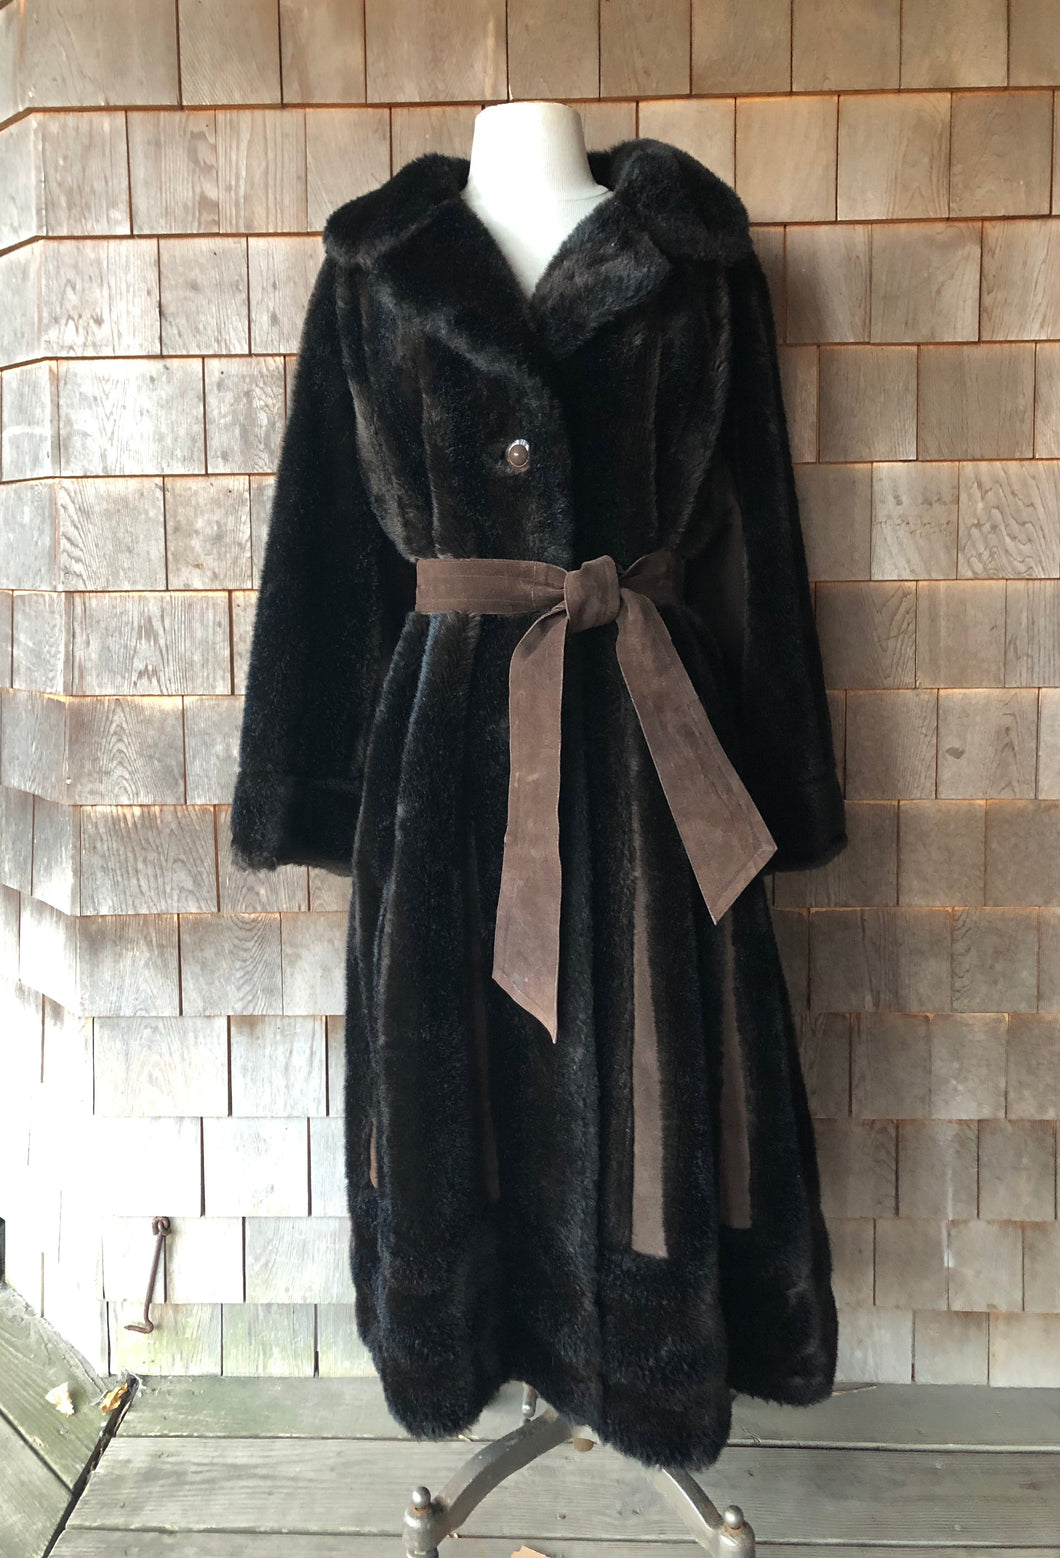 Vintage 1960s Lilli Ann Chocolate Brown Faux Fur Coat with Suede Insets & Belt